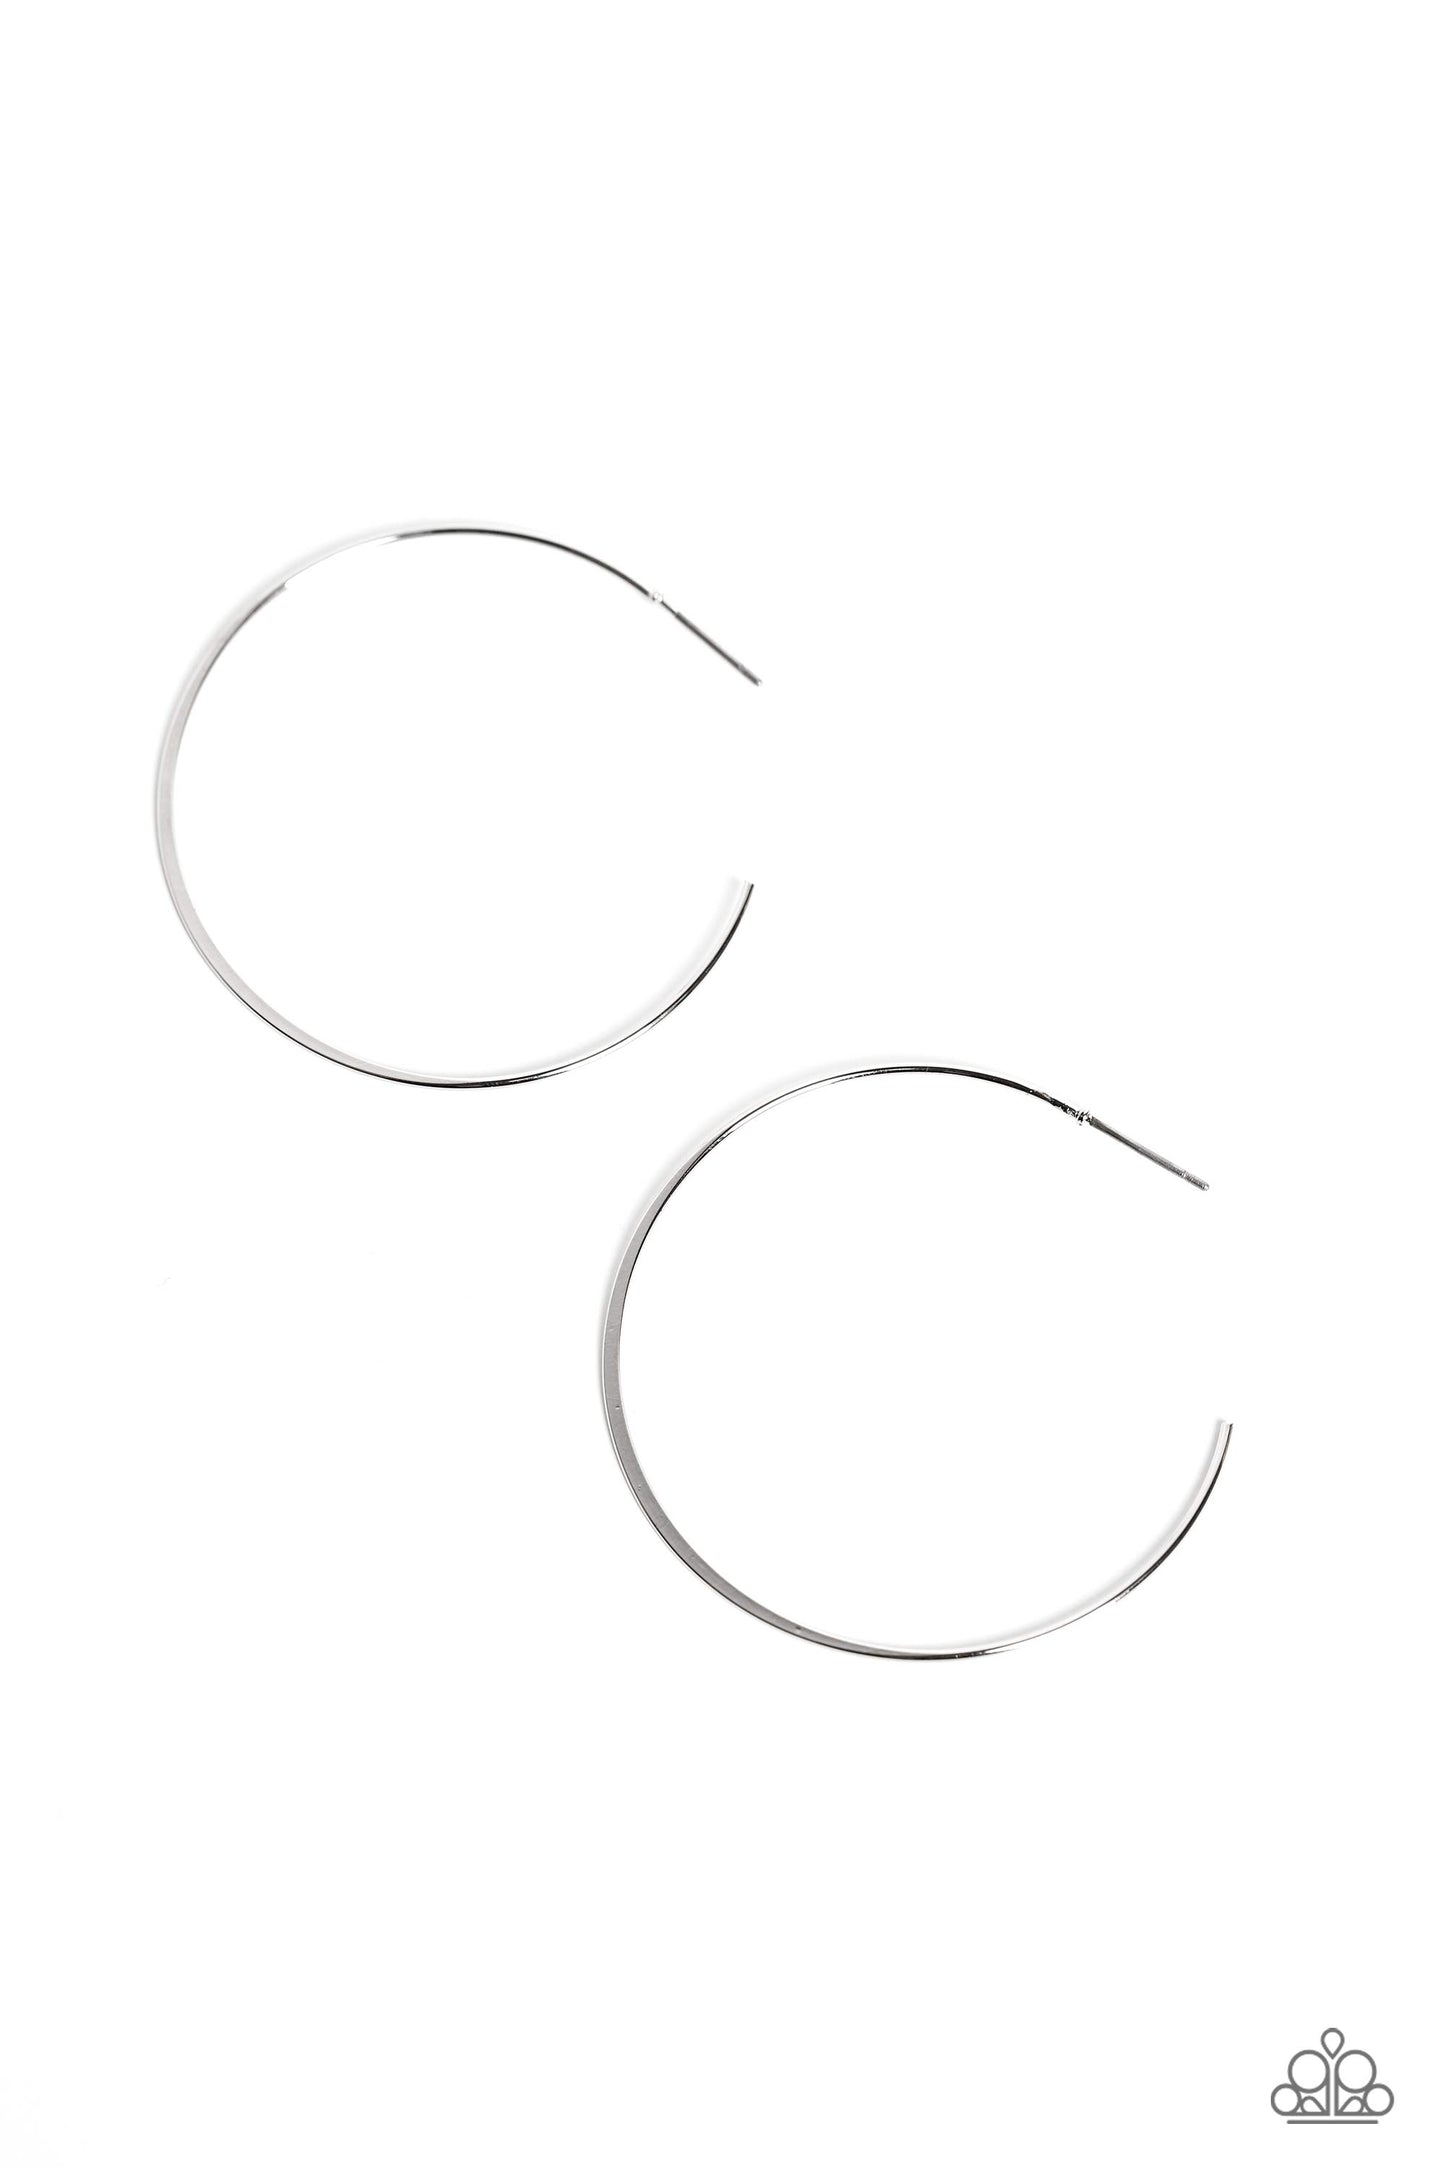 Seize the Sheen Silver Hoop Earring - Paparazzi Accessories  Featuring a high-sheen, a thin smooth silver bar curves into an oversized hoop resulting in a basic staple piece. Earring attaches to a standard post fitting. Hoop measures approximately 2" in diameter.  Sold as one pair of hoop earrings.  P5HO-SVXX-363XX